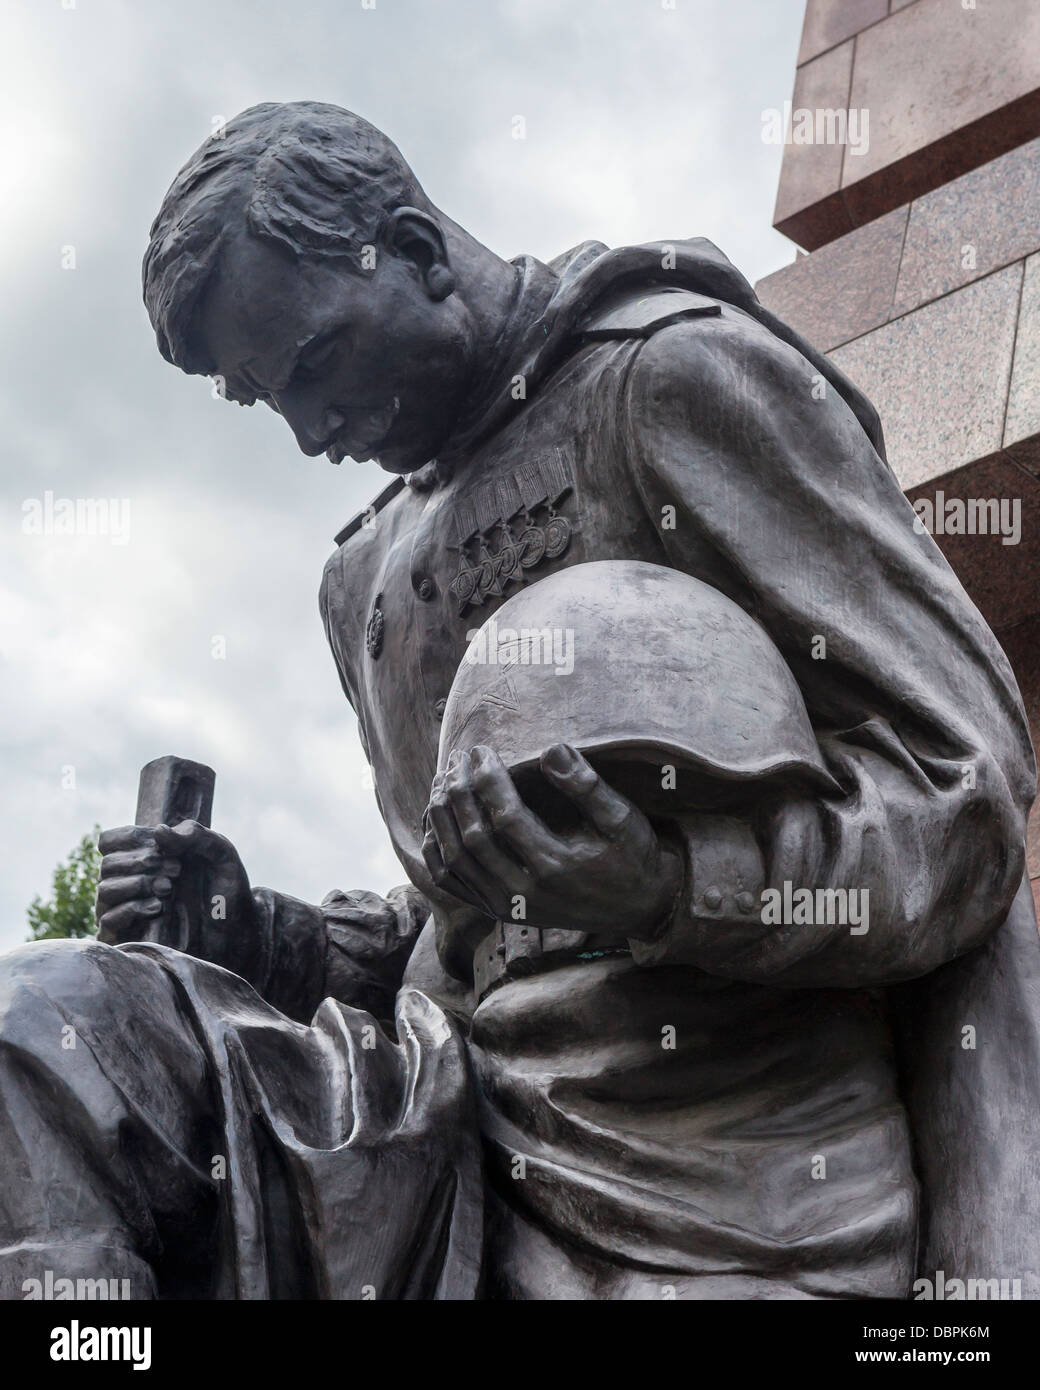 Soldier with bowed head holding helmet and gun at the Soviet War memorial for 5000 soldiers who died in WW2, Treptow, Berlin Stock Photo